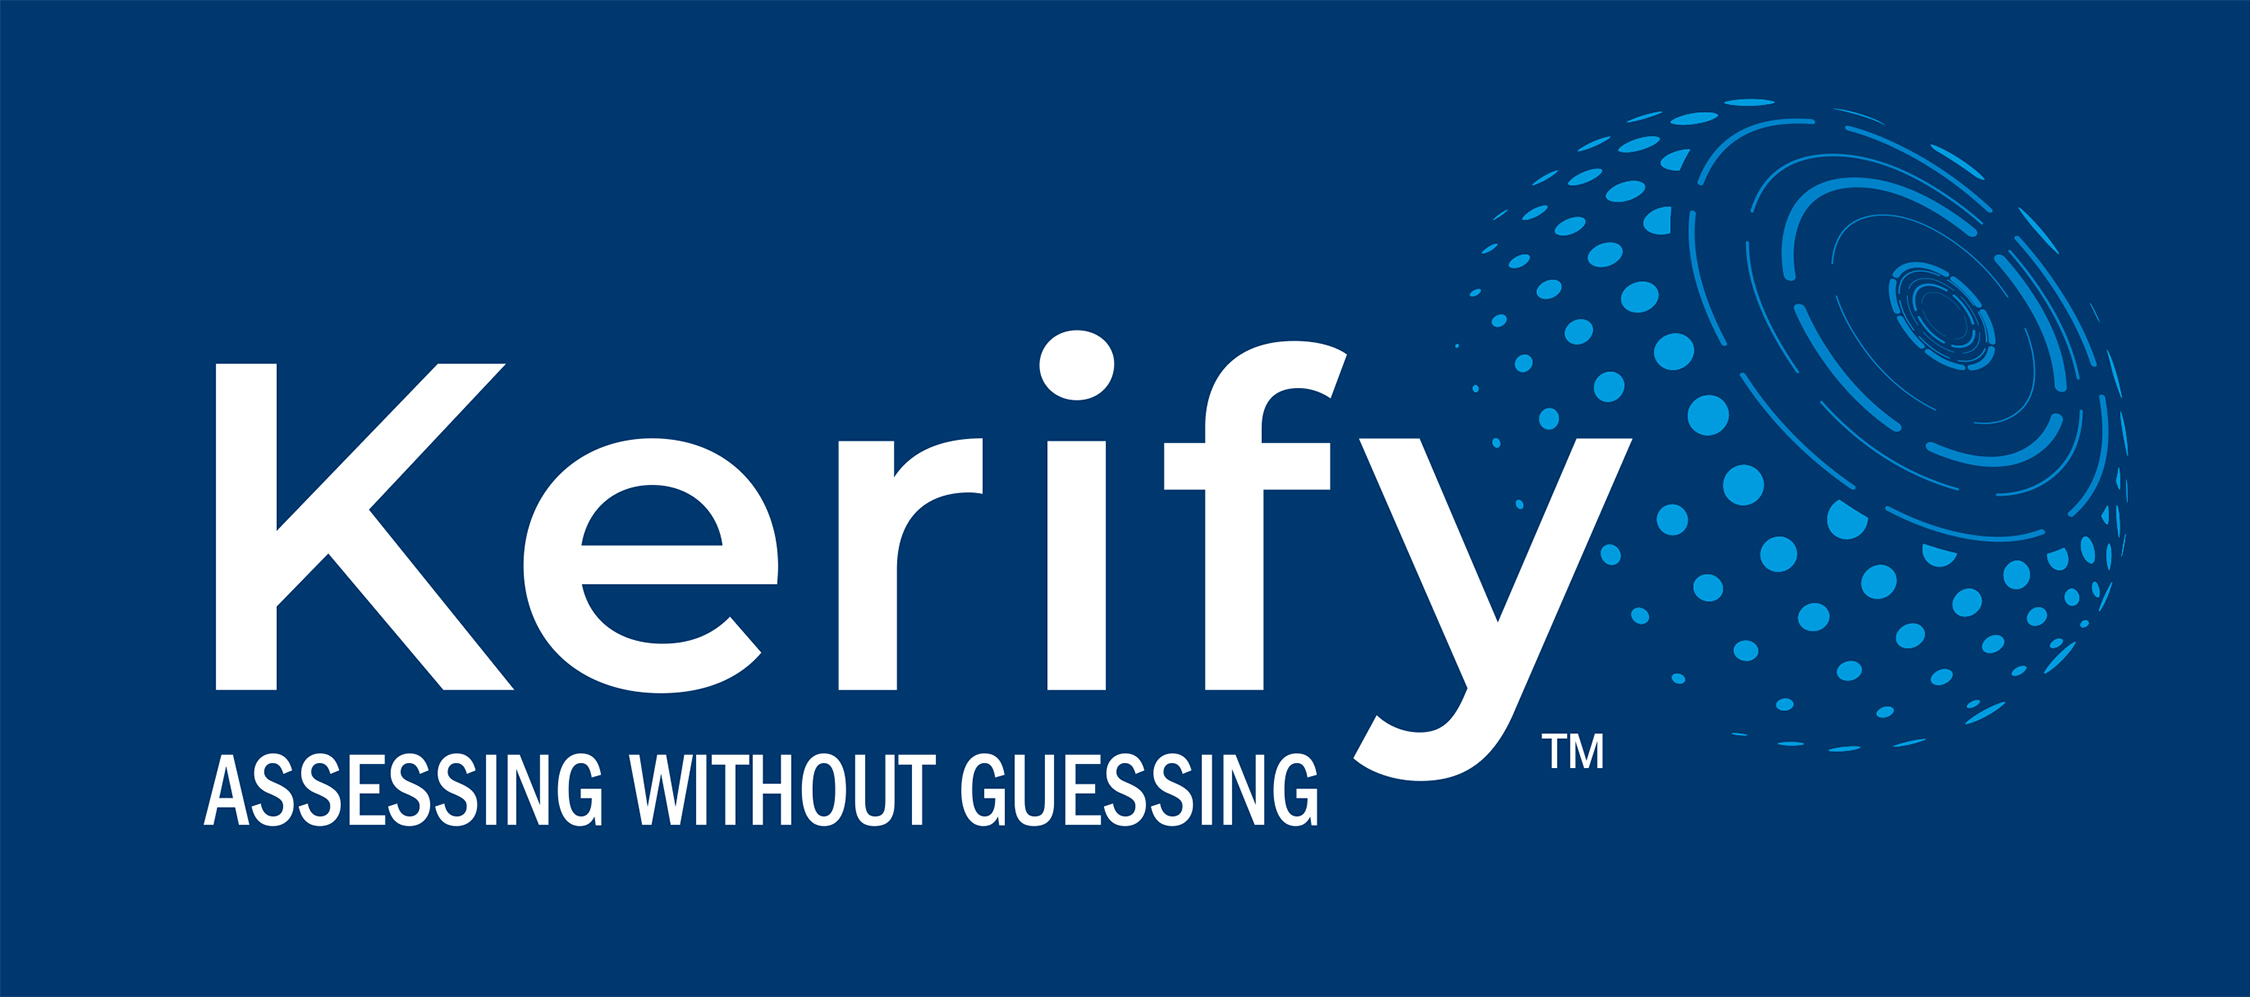 Logo of Kerify (trademarked) - White on blue background. Includes the tagline Assessing without Guessing